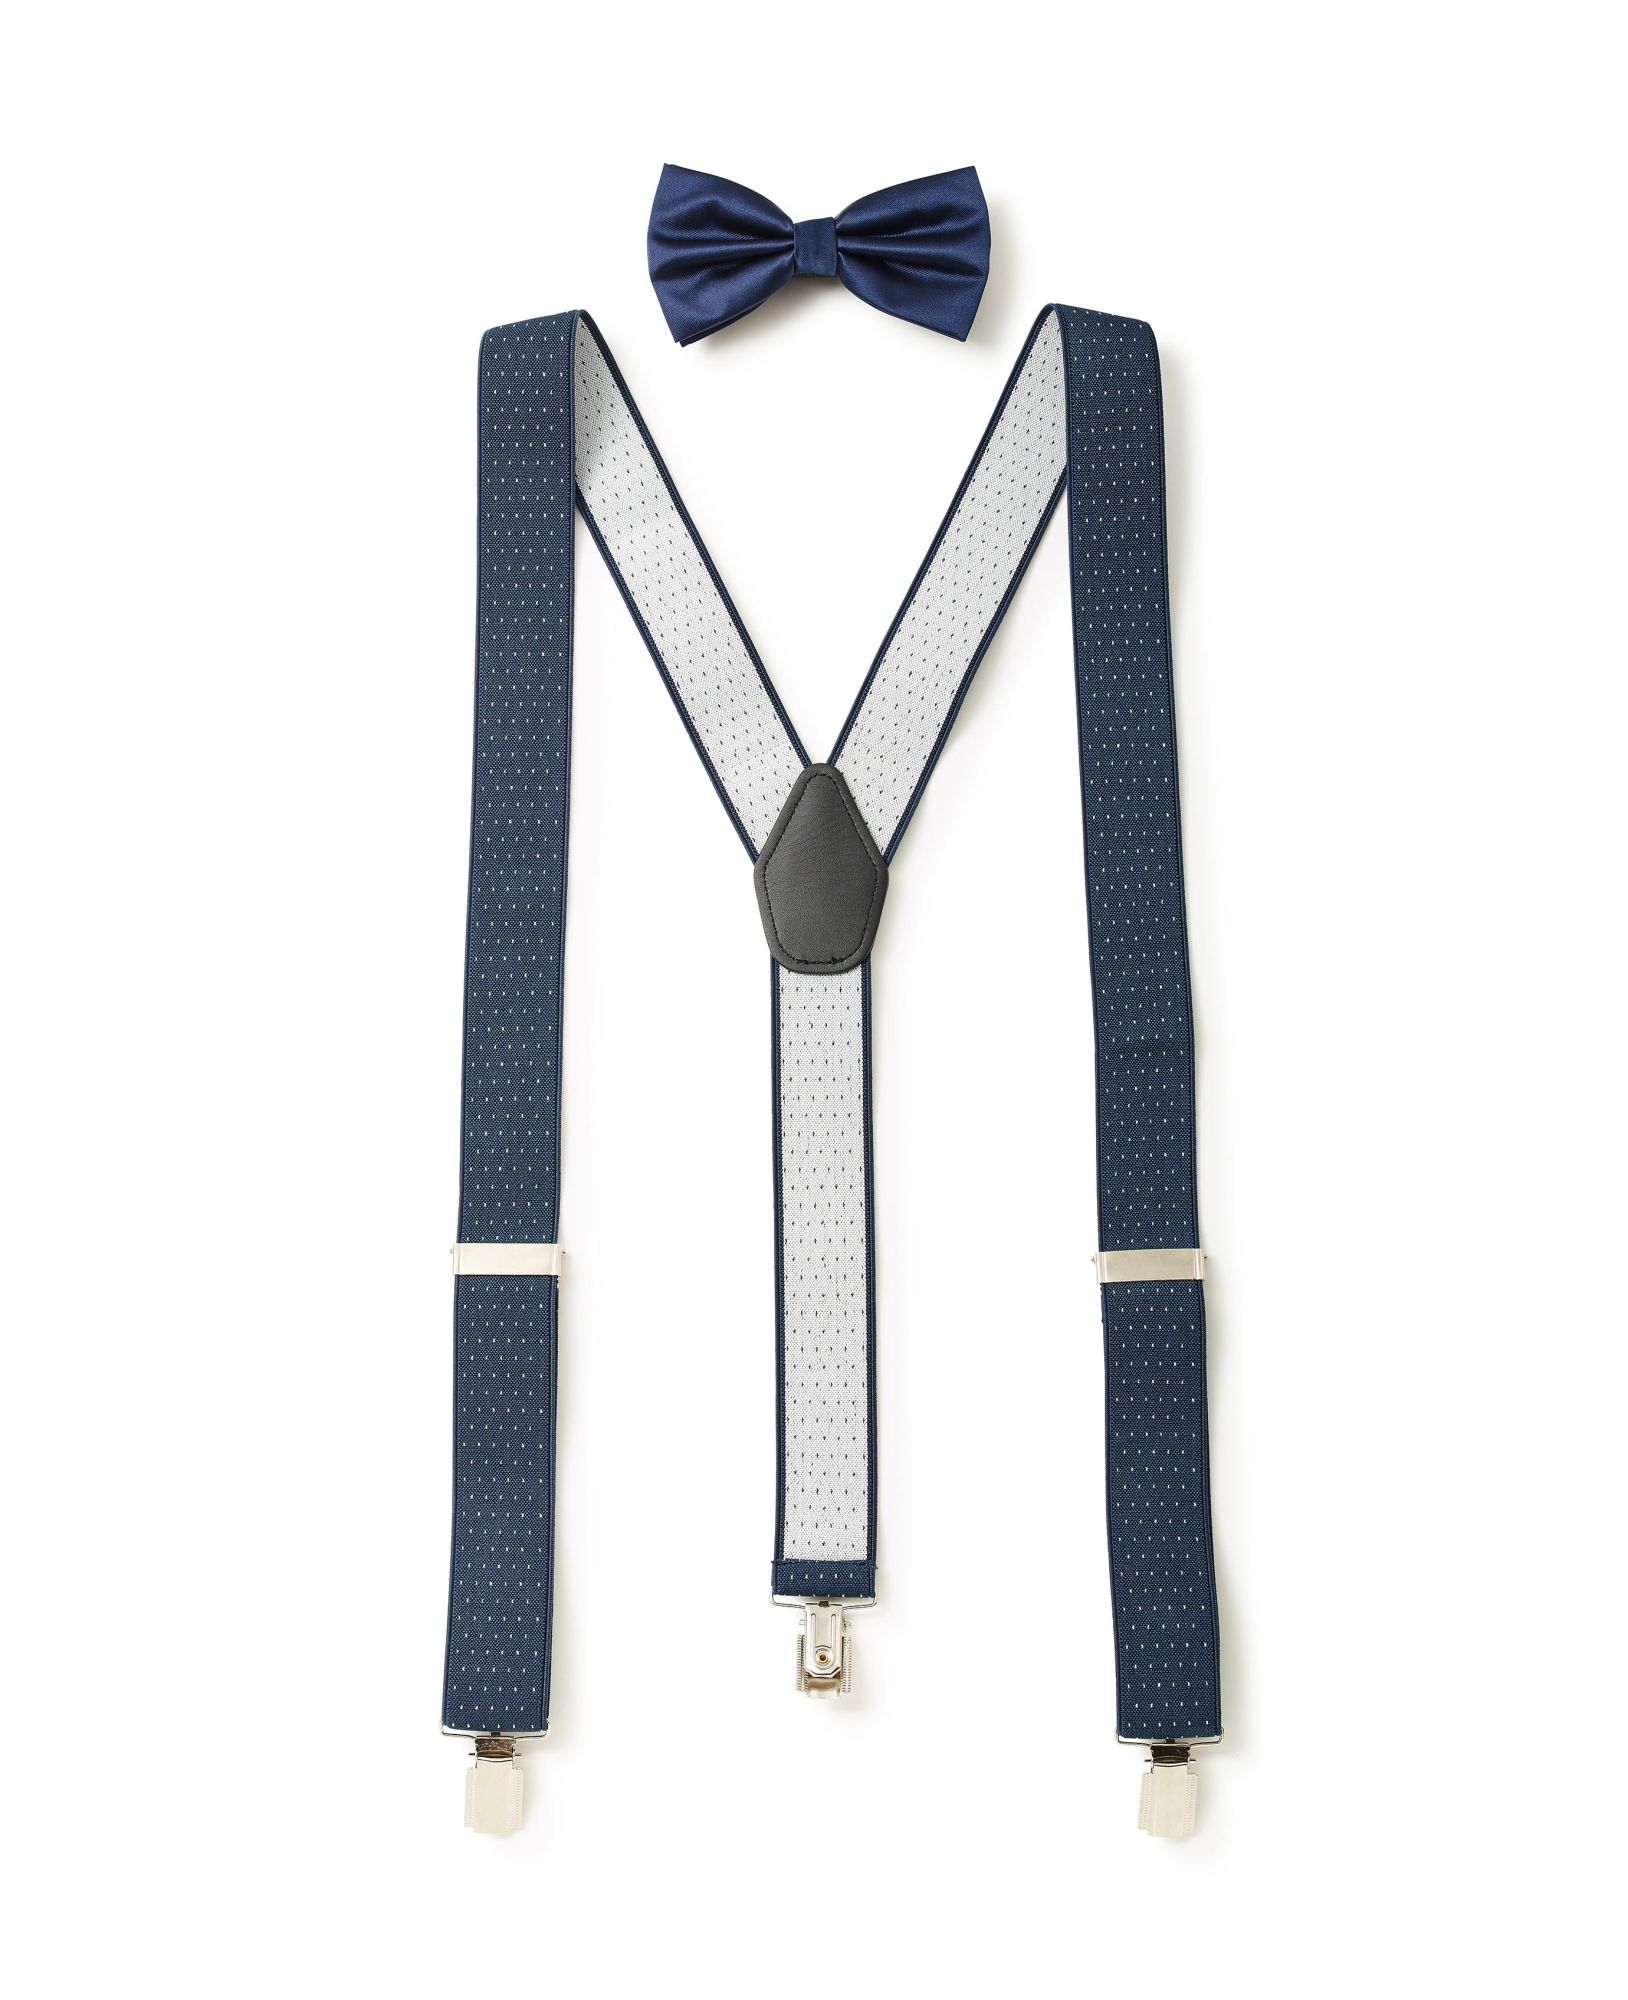 Navy Spotted Braces & Bow Tie Set by Savile Row Company